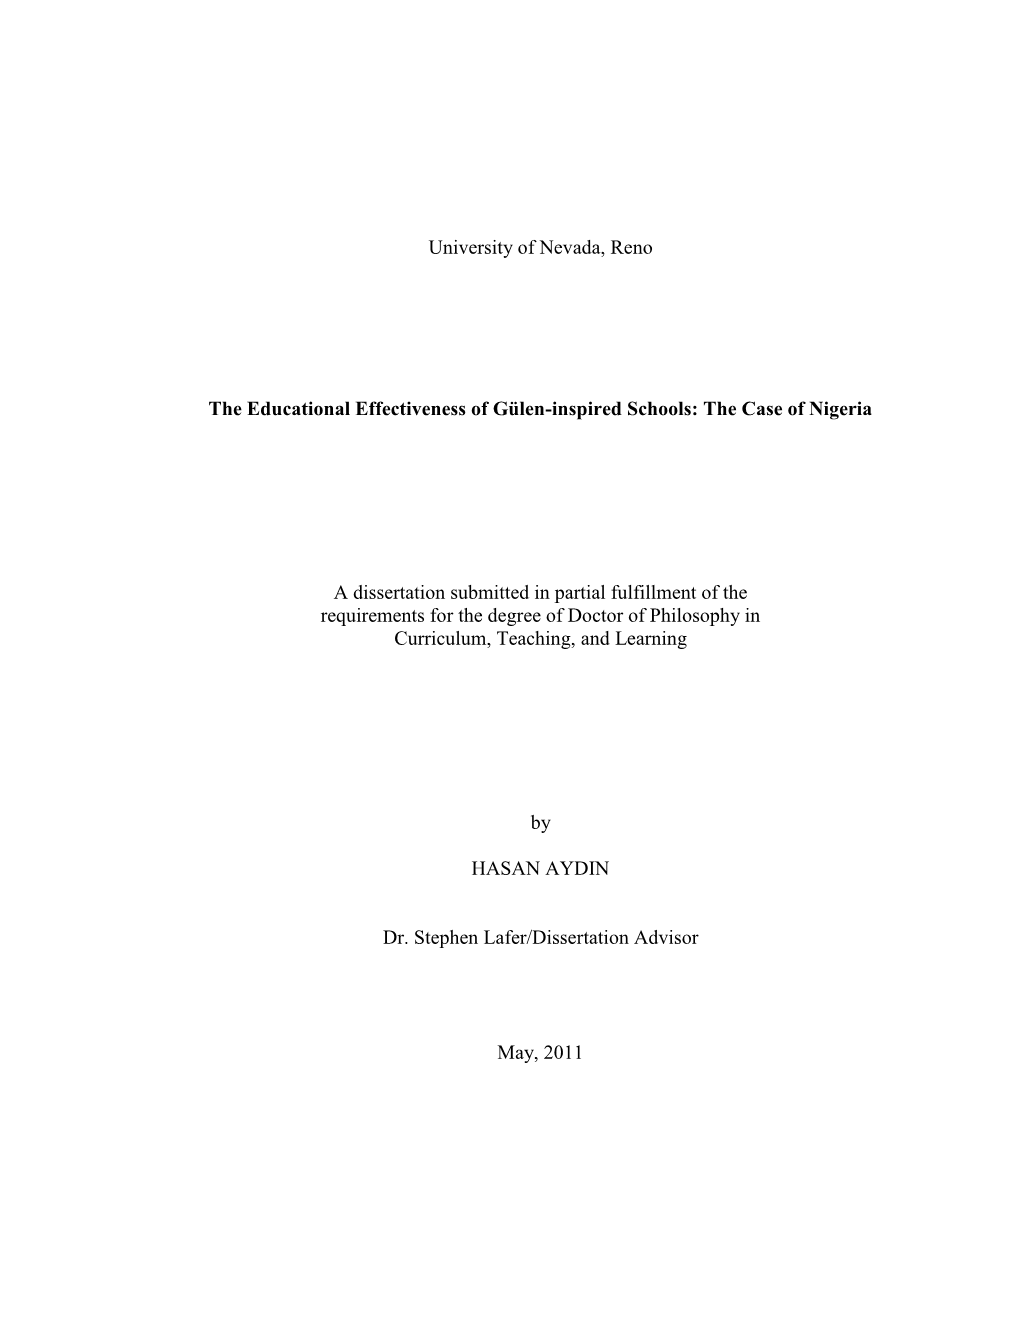 University of Nevada, Reno the Educational Effectiveness of Gülen-Inspired Schools: the Case of Nigeria a Dissertation Submitte